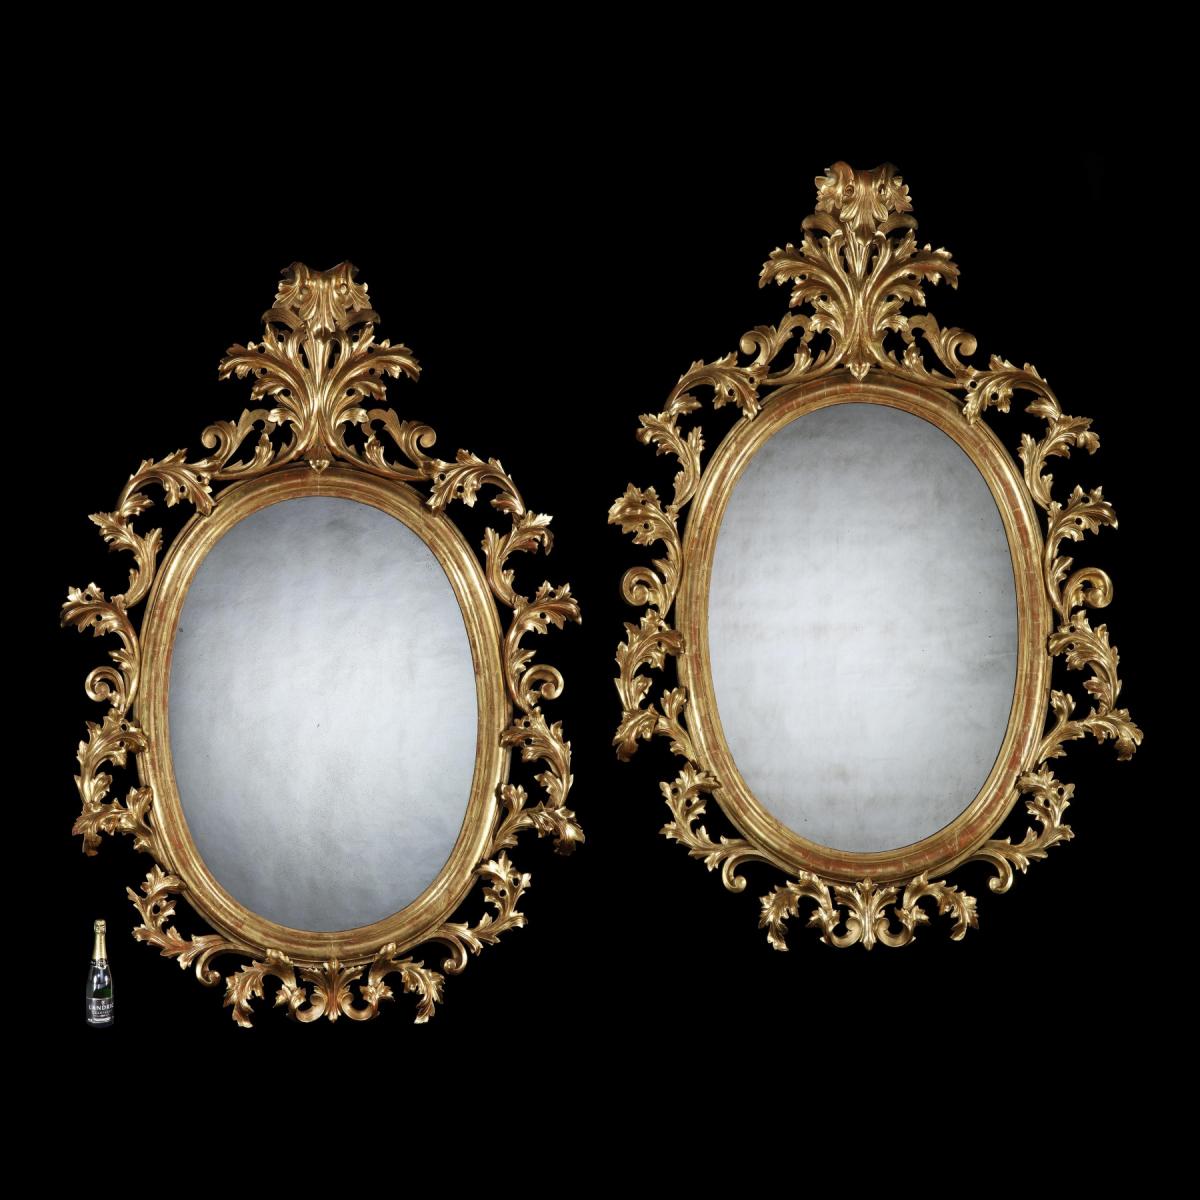 Grand Scale Pair of 19th Century Oval Florentine Carved Gilt Wood Mirrors